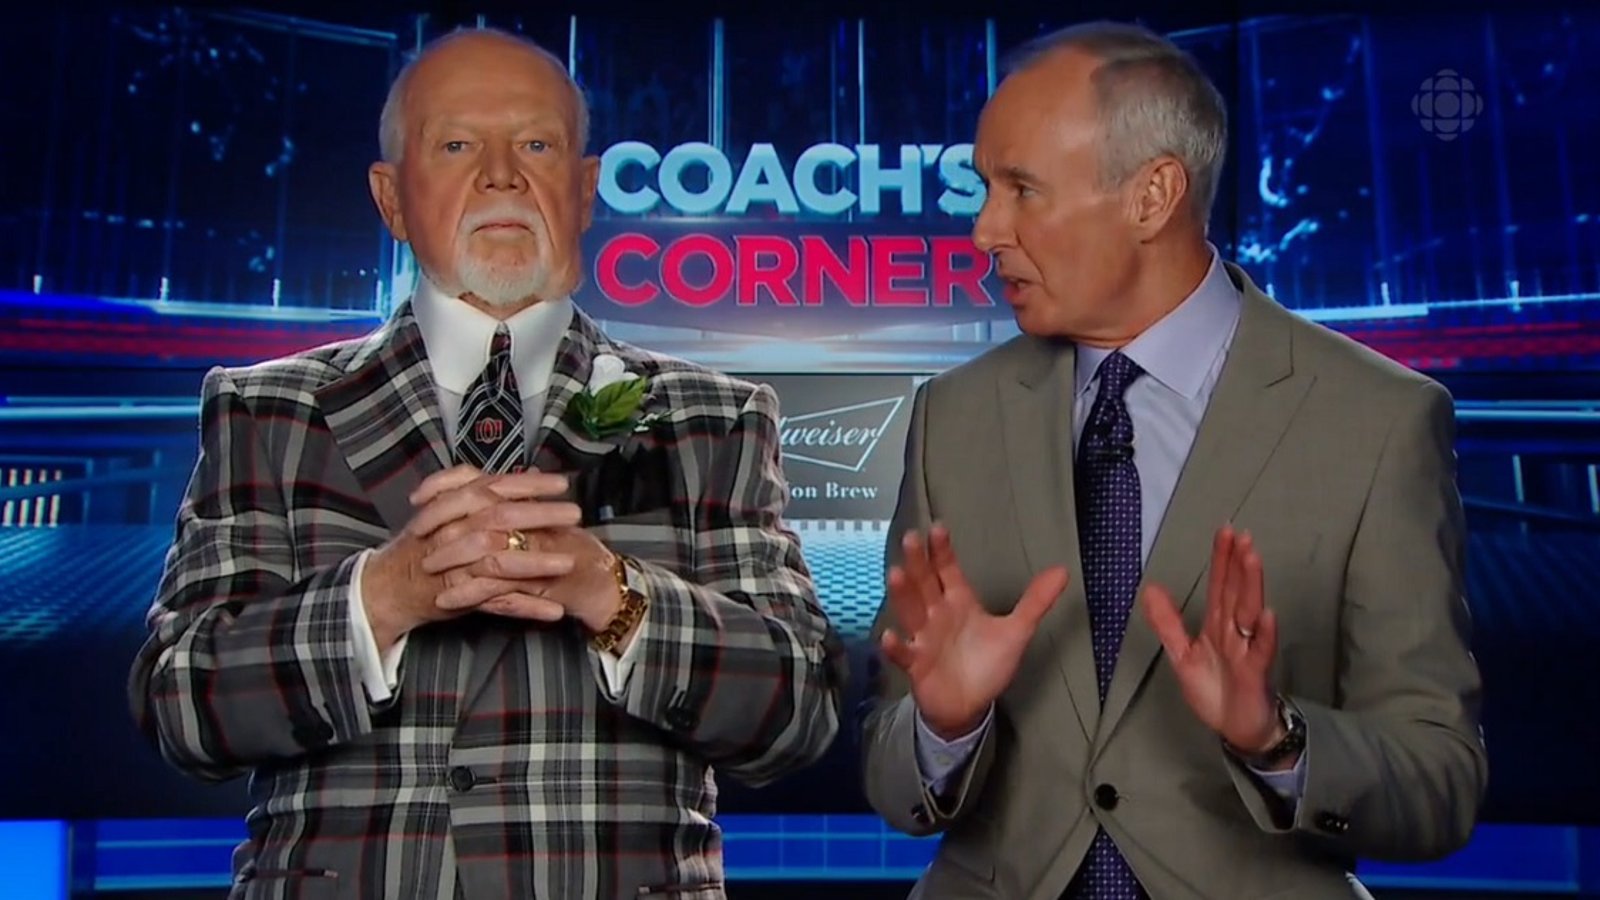 The NHL issues on statement on Don Cherry's comments last night.